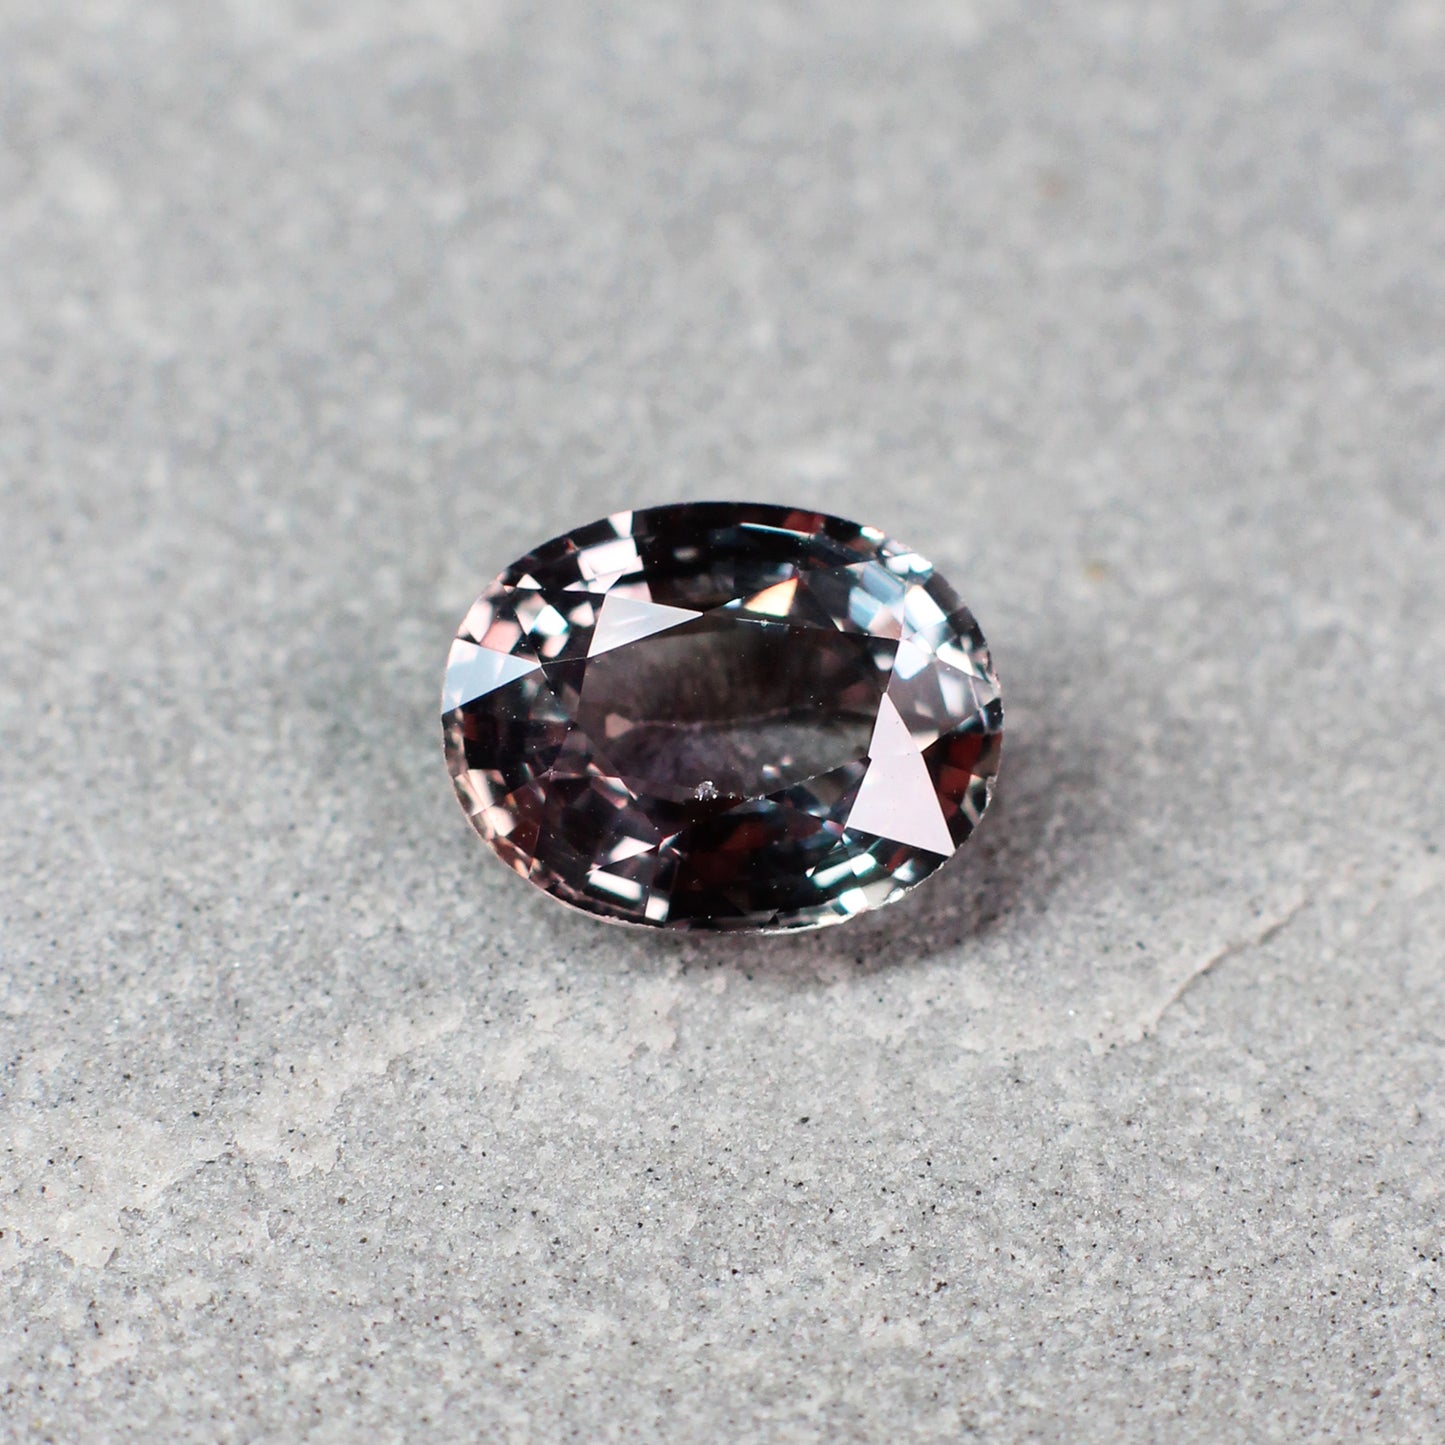 2.35ct Greenish Purple / Brownish Pink, Oval Color Change Sapphire, No Heat, East Africa - 9.08 x 7.02 x 4.04mm